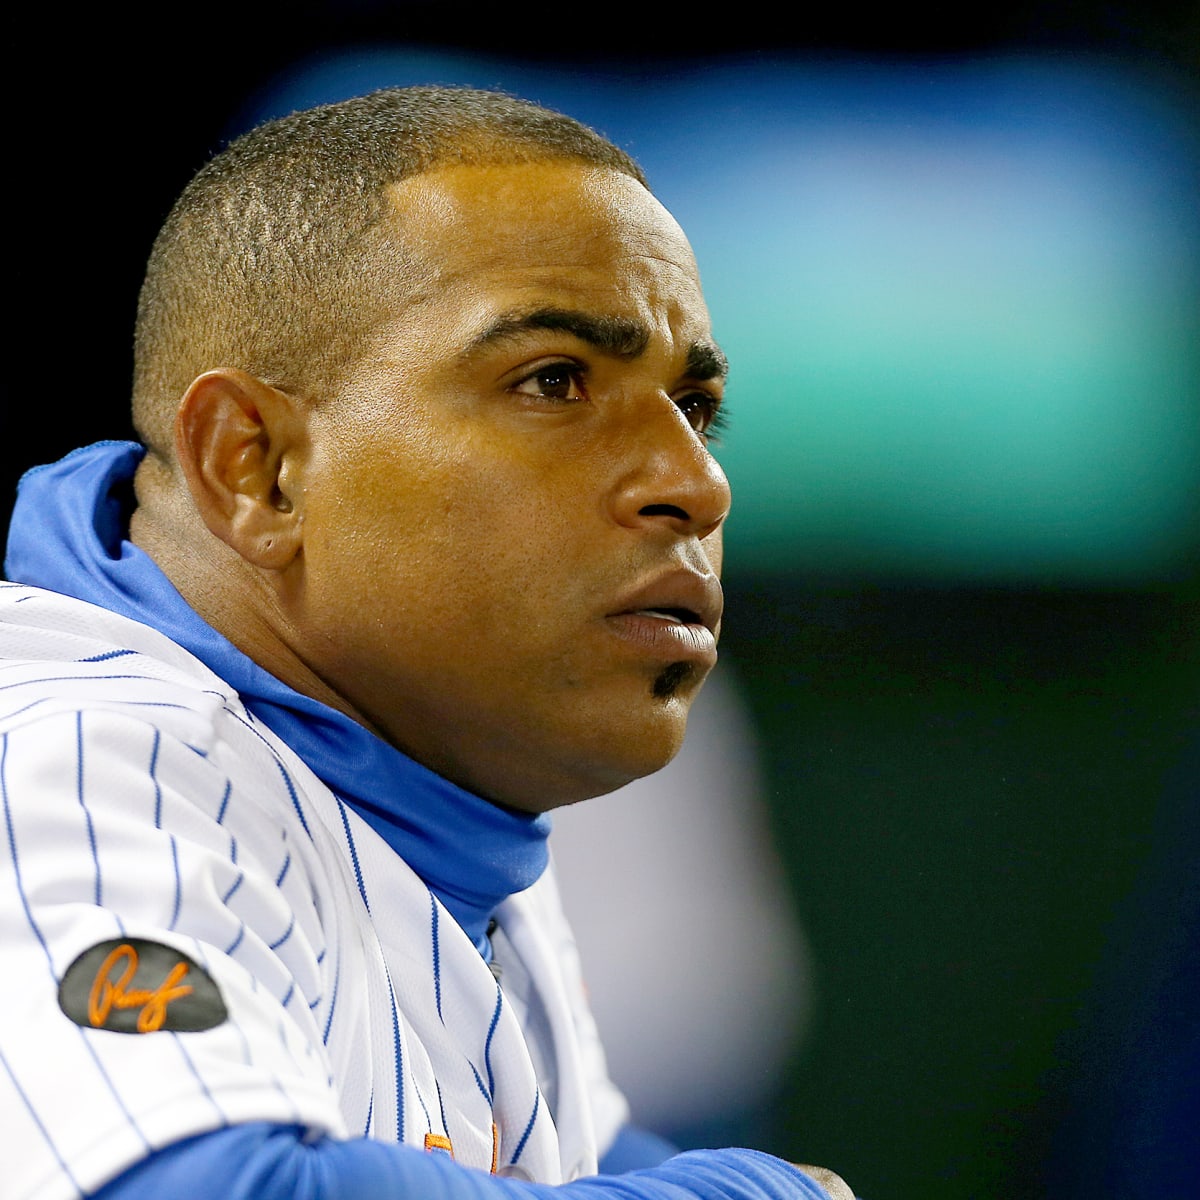 Mets' Yoenis Cespedes Opts Out of 2020 Season - The New York Times